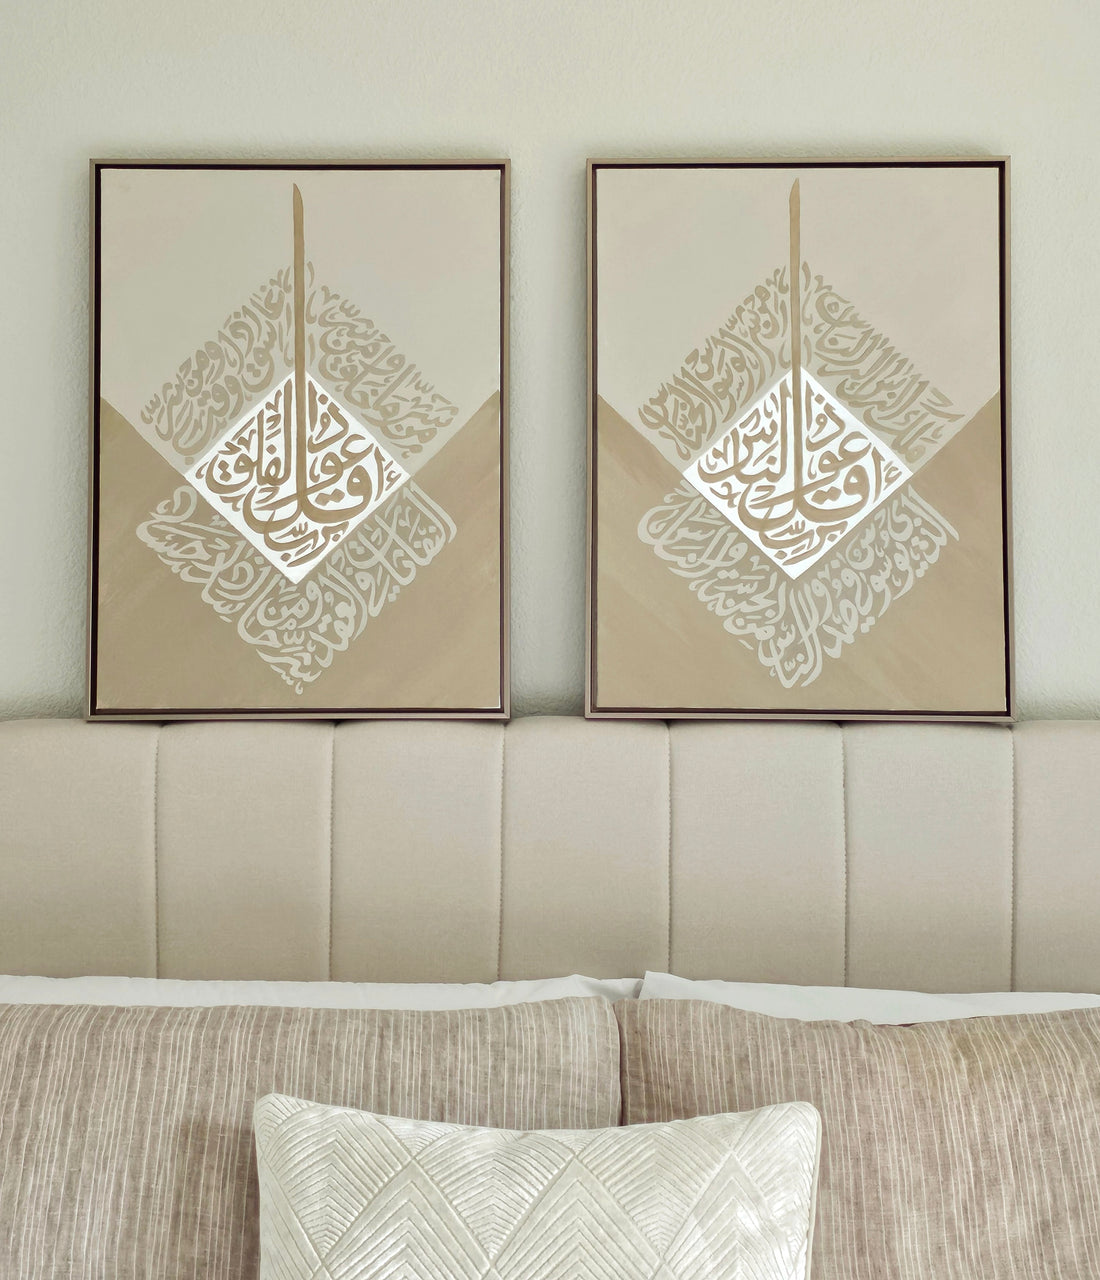 Acrylic Hand made Paint on Champagne Gold Framed Canvas (set of 2)